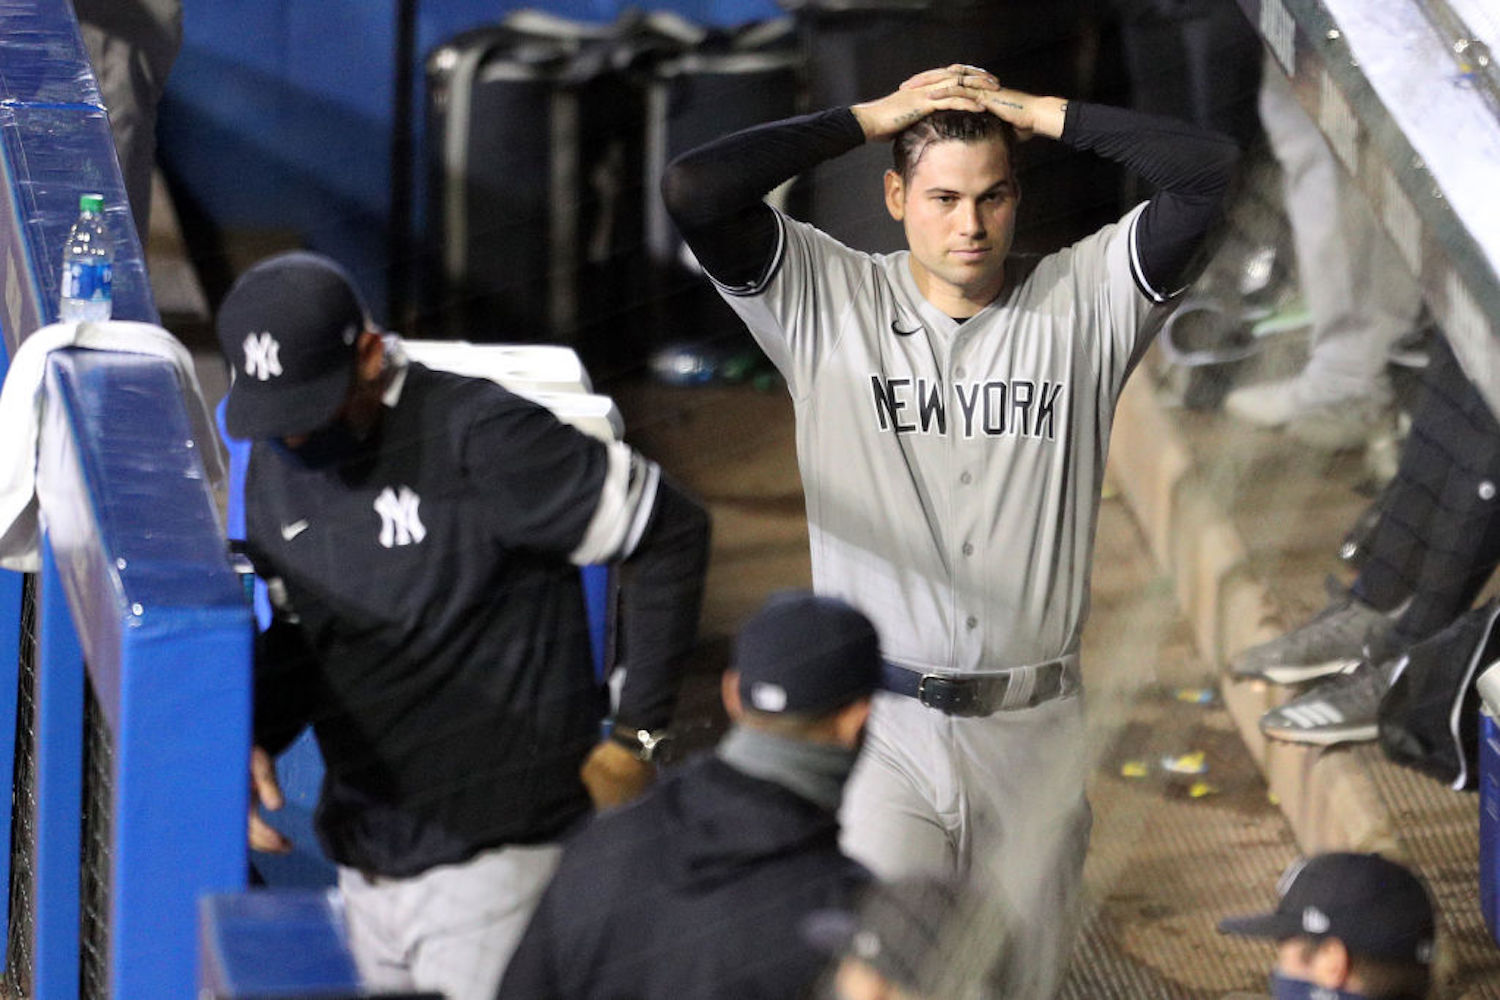 The Yankees Aren’t Even the Best MLB Team in New York Anymore